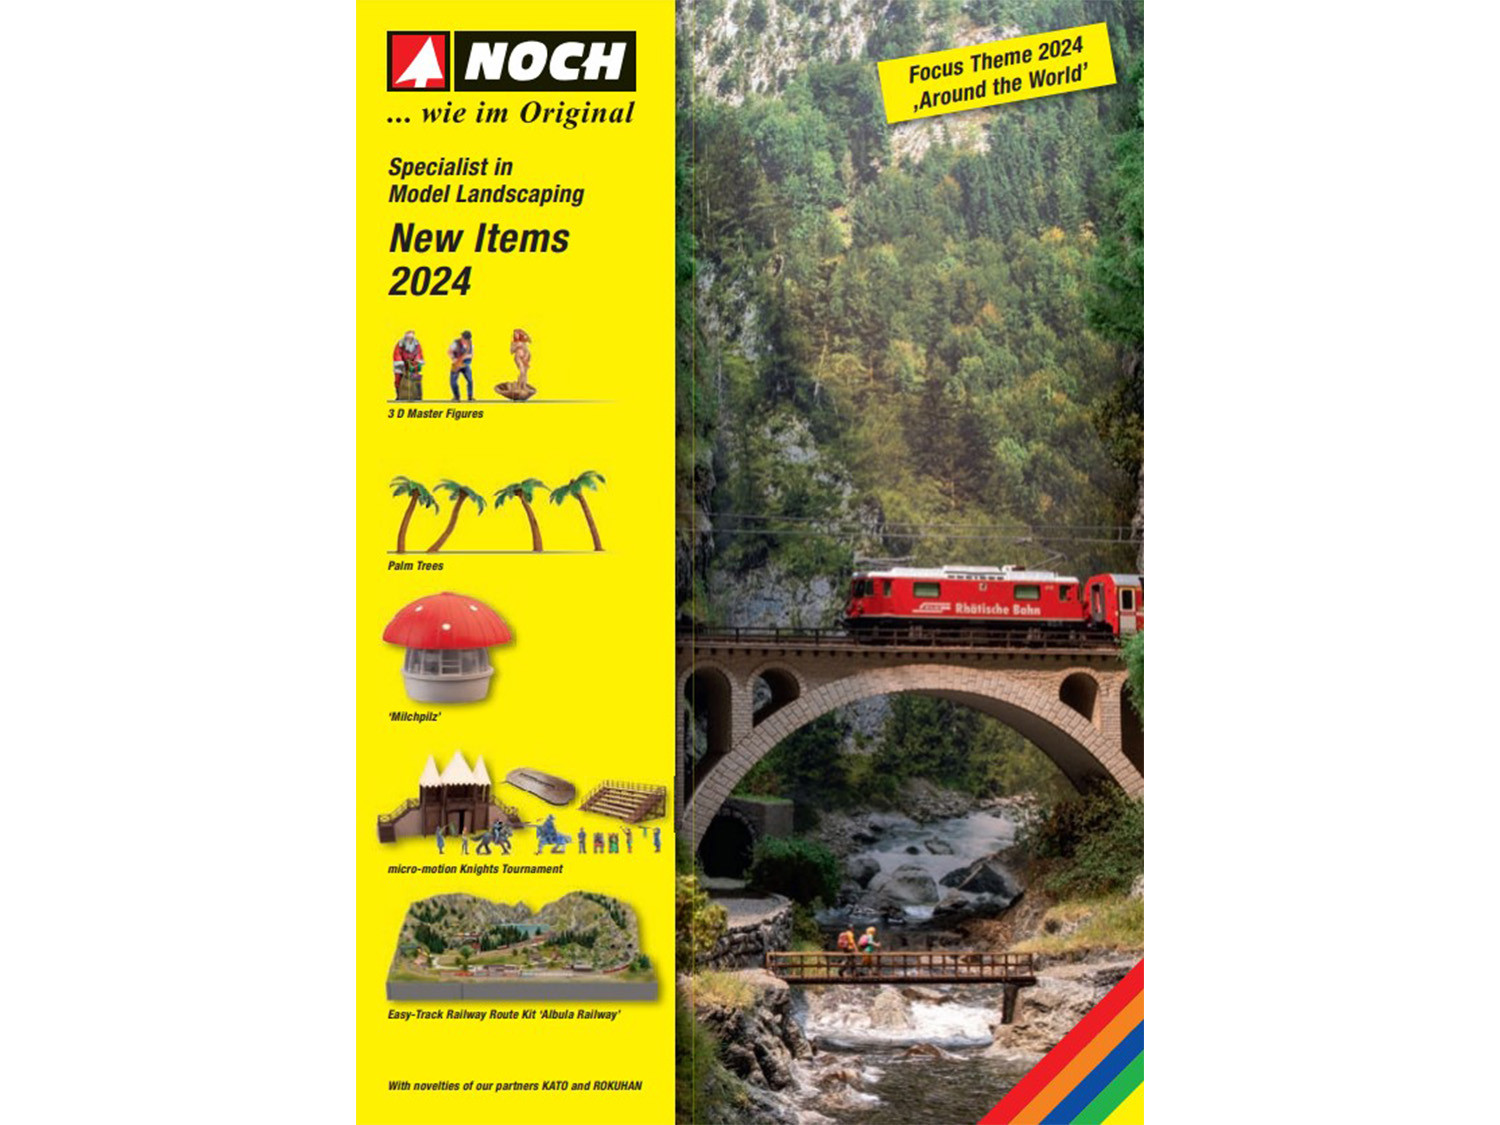 NOCH New Items Leaflet 2024